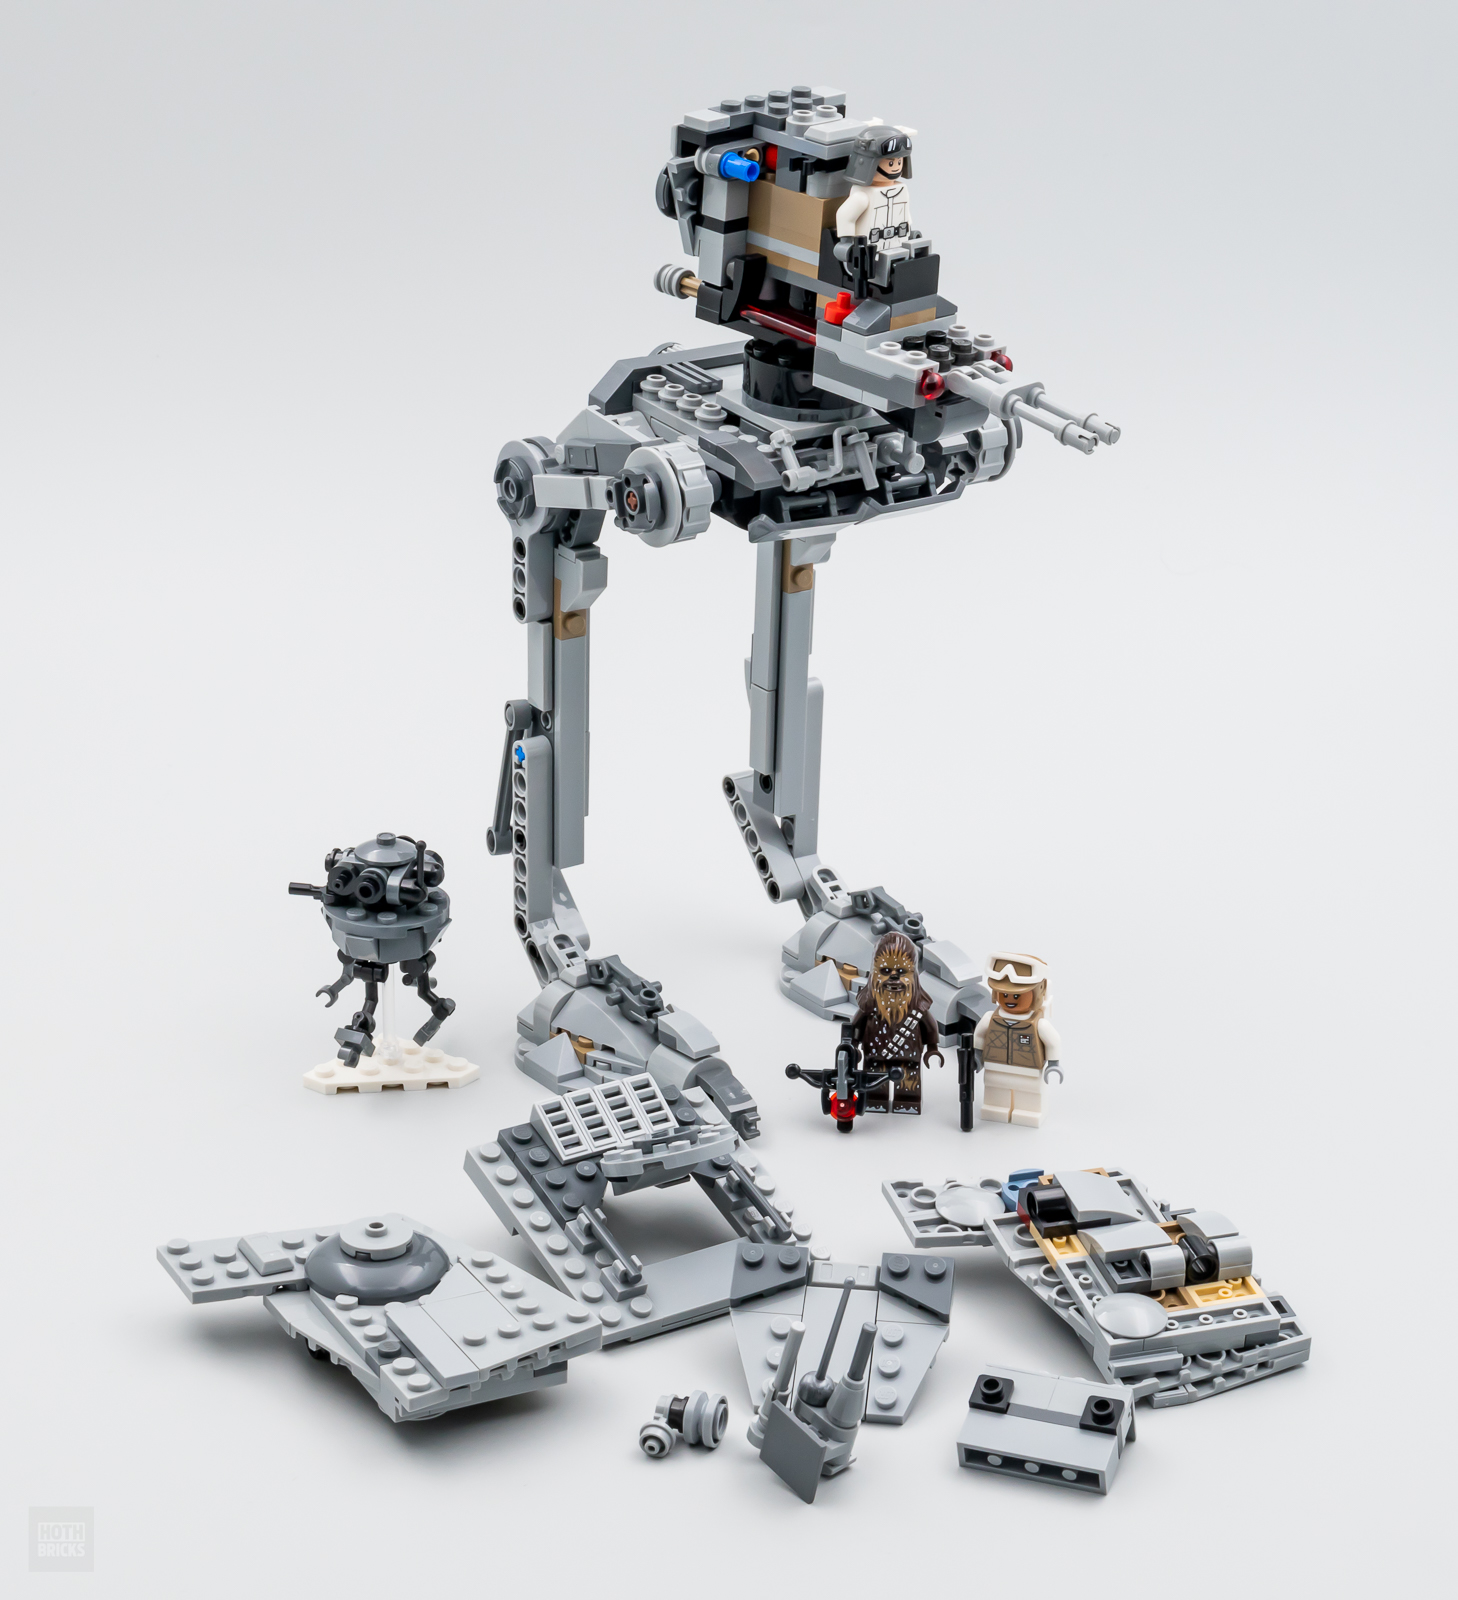 LEGO Star Wars Hoth AT-ST 75322 by LEGO Systems Inc.